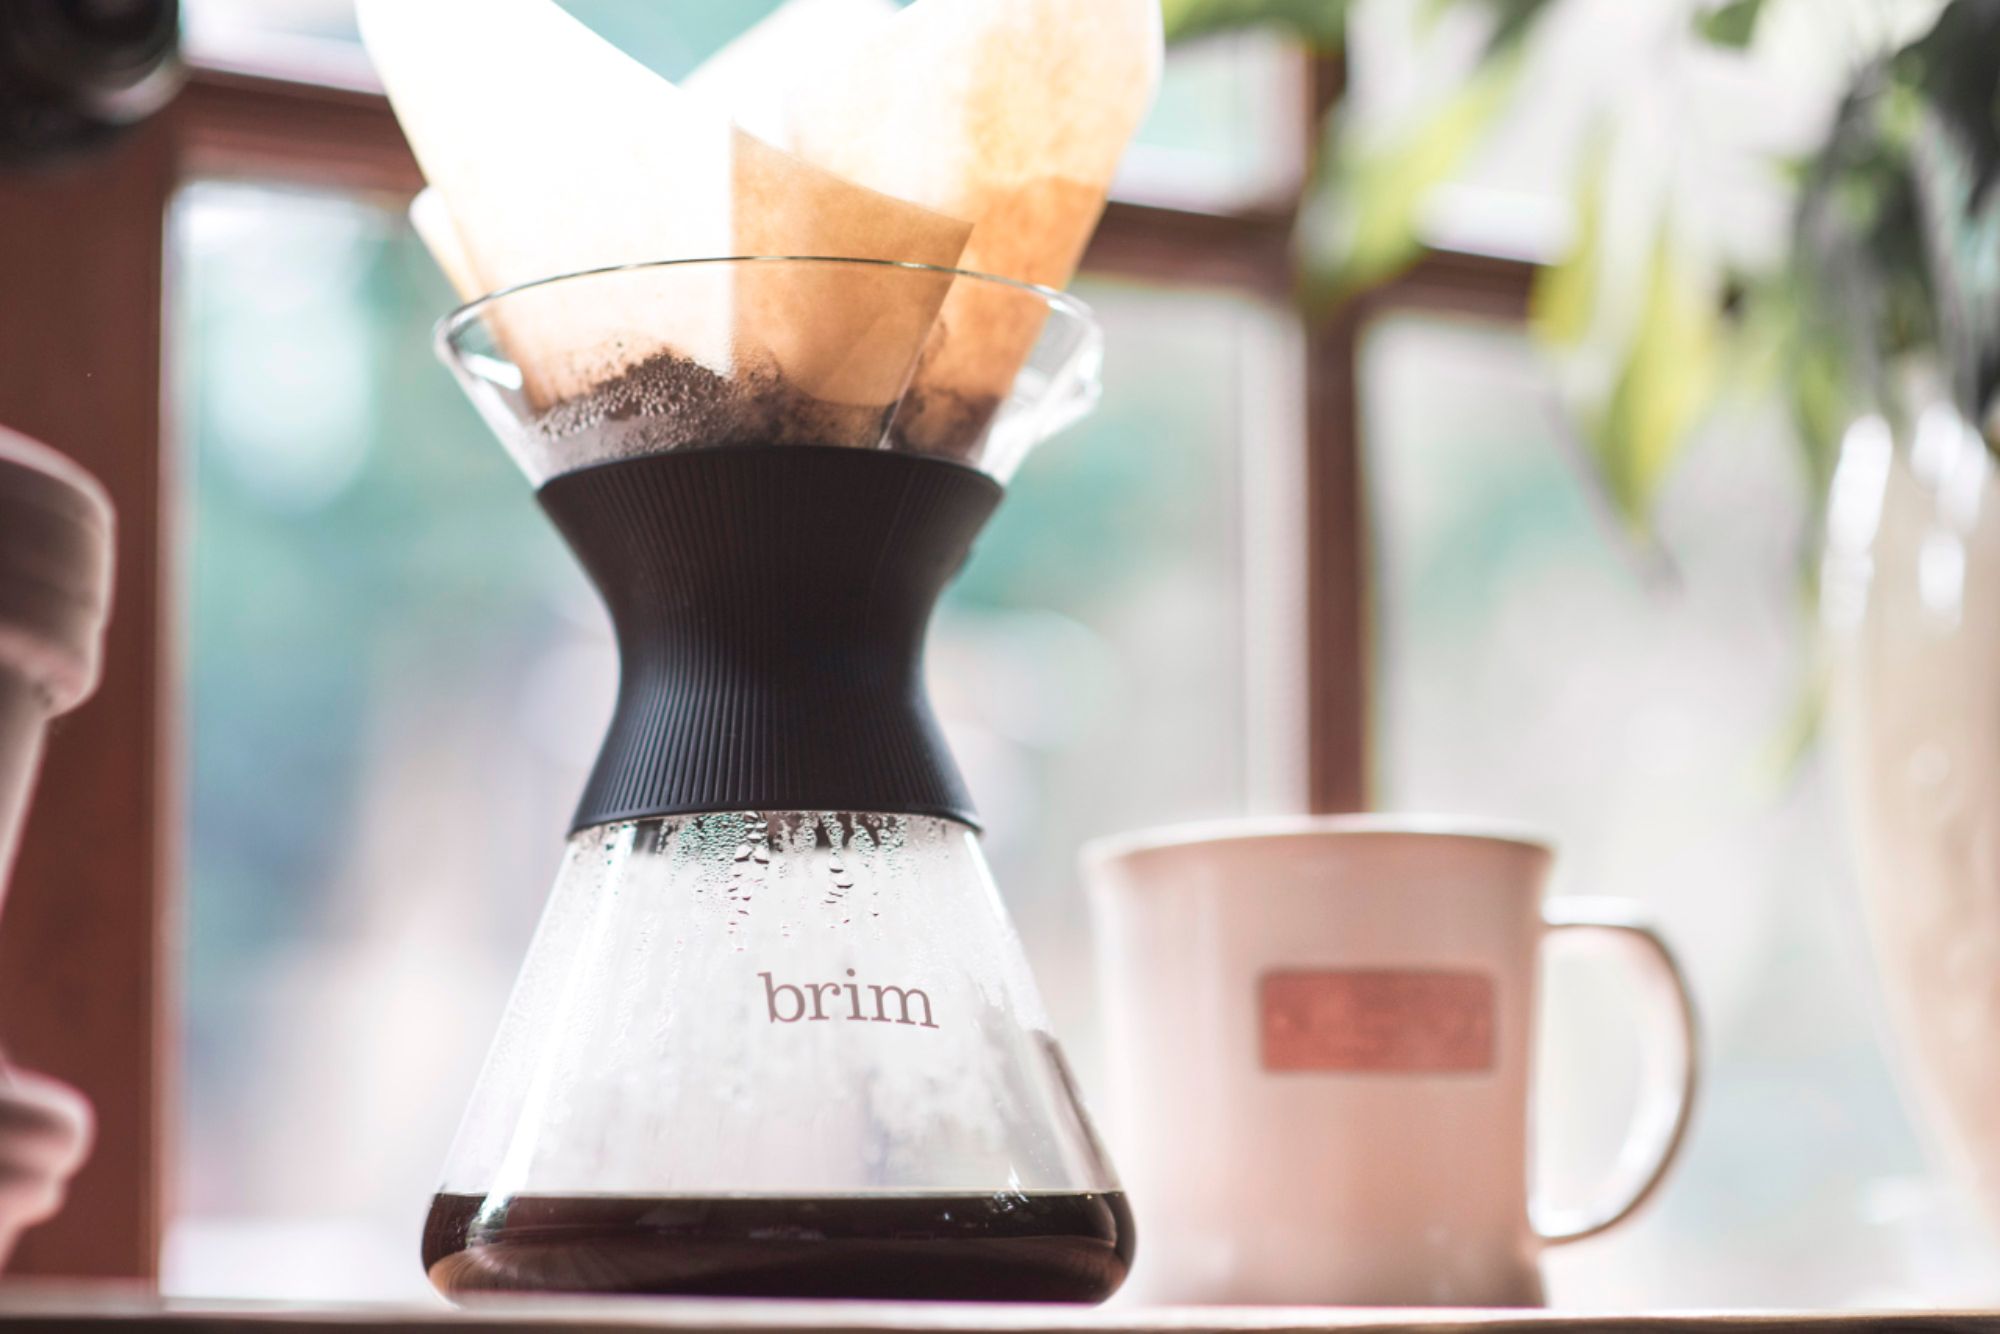  Brim 6 Cup Pour Over Coffee Maker Kit, Simply Make Rich,  Full-Bodied Coffee Every Time, Set Includes Glass Carafe, SCA Measuring  Scoop, Silicone Sleeve, and Healthy-Eco Reusable Filter, Black : Home